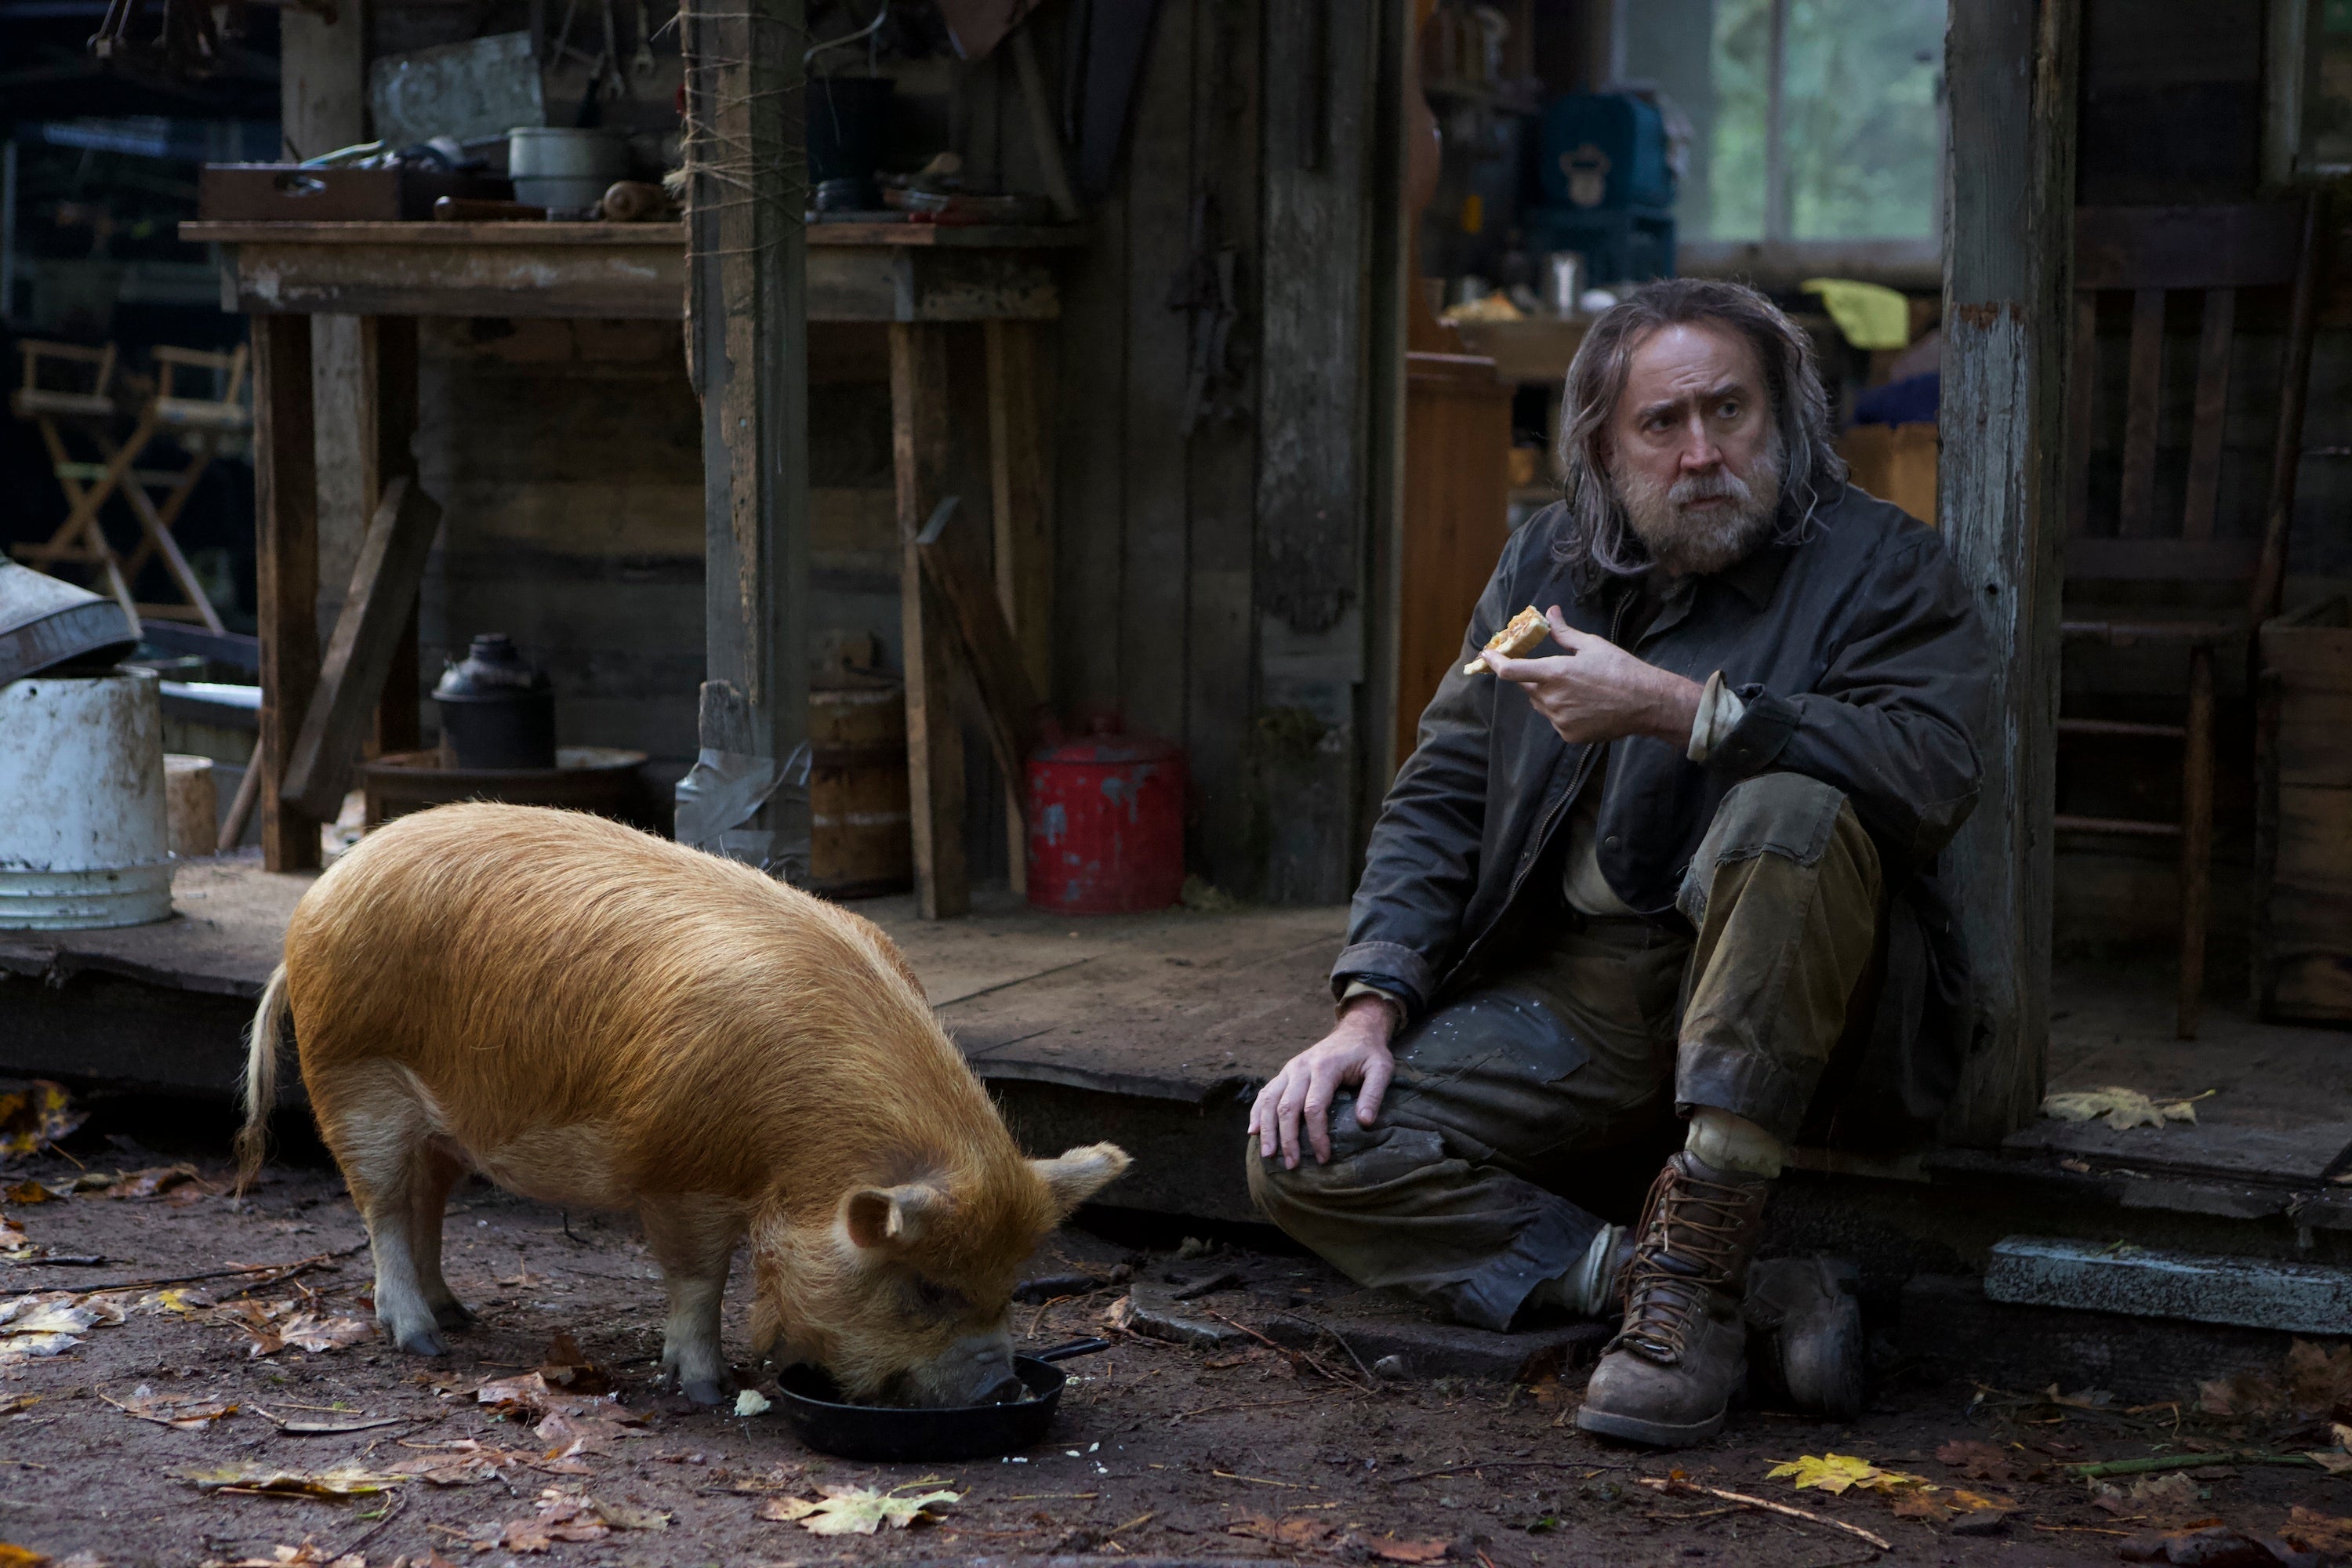 A bearded, rugged Nicolas Cage sits on a dilapidated porch near a fuzzy brown pig